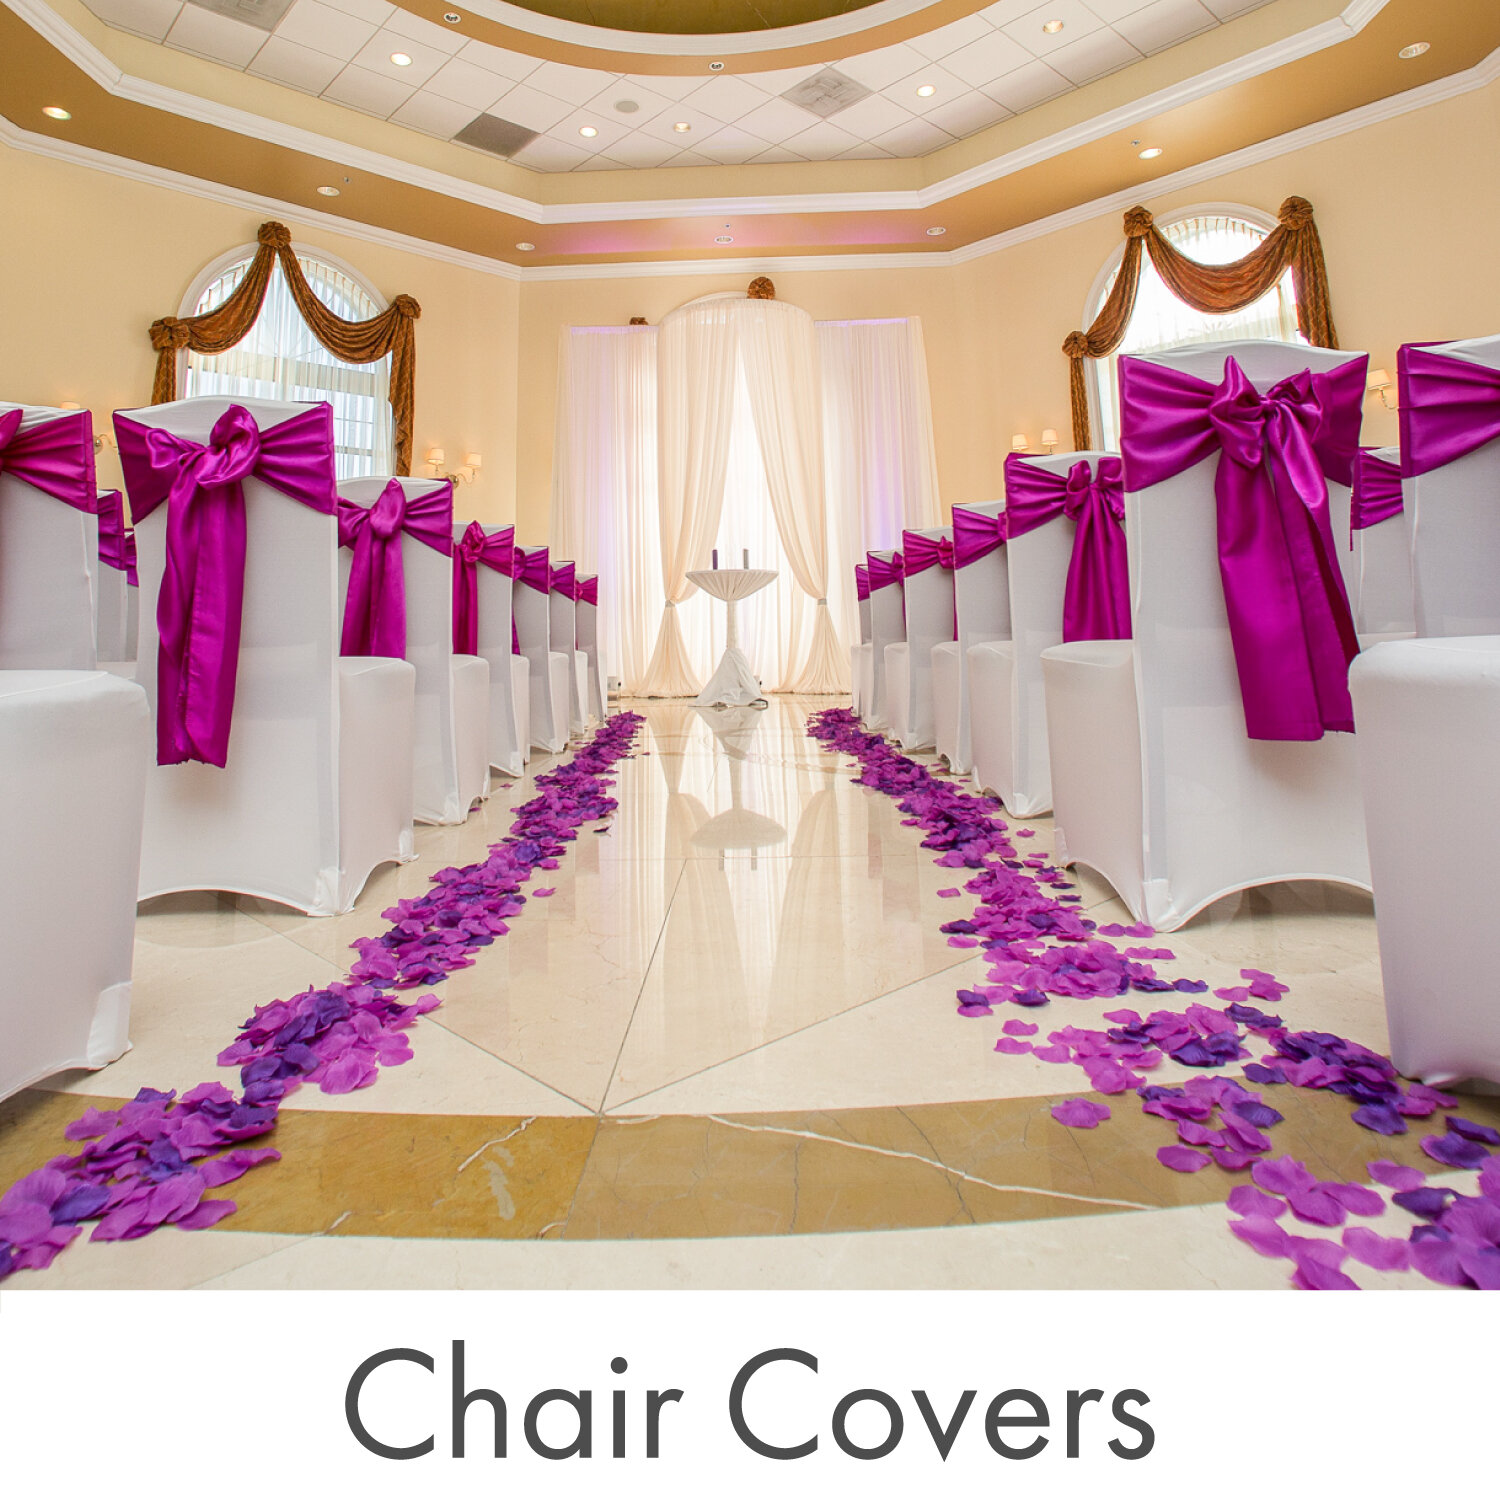 Category-Icons-Chair-Covers.jpg